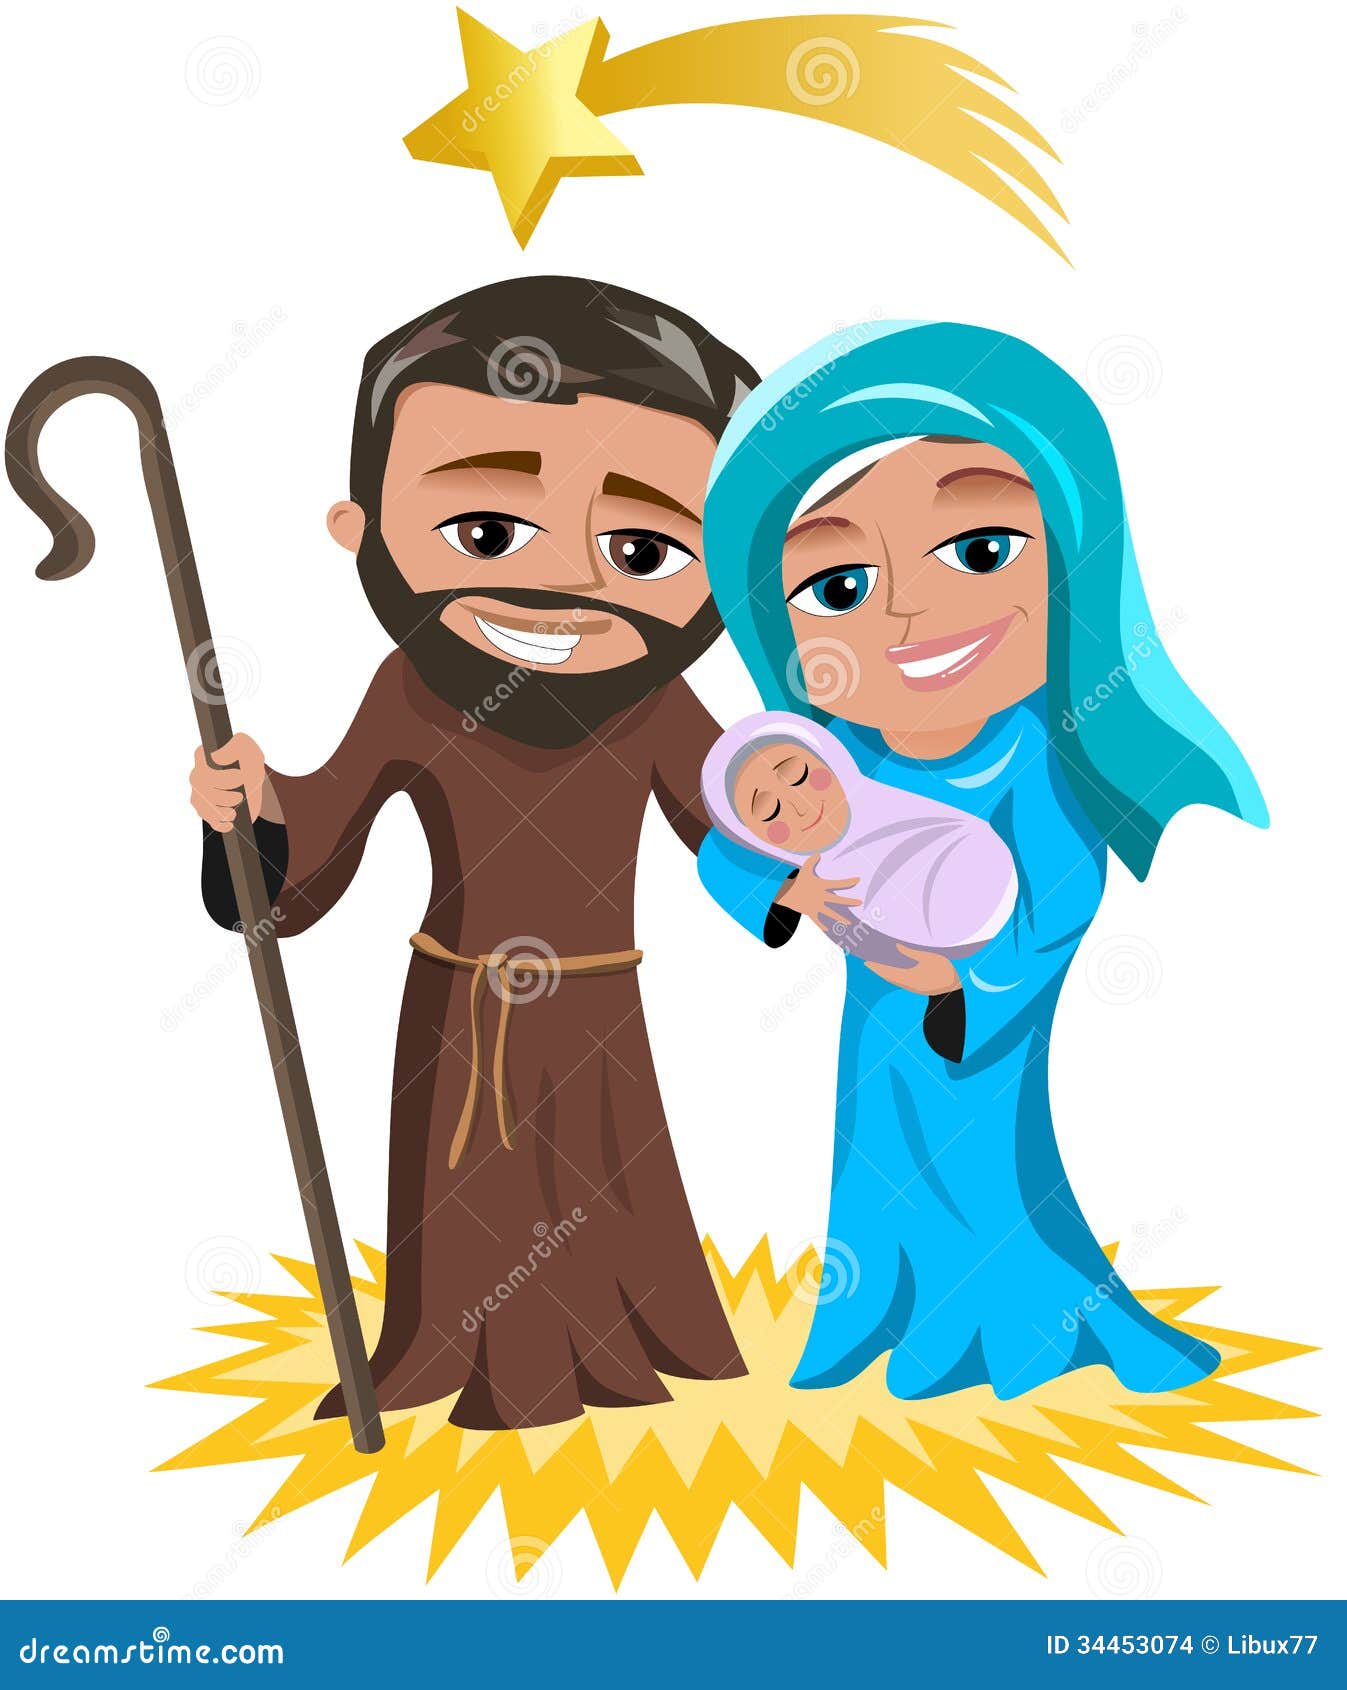 clipart jesus holding a man up - photo #20